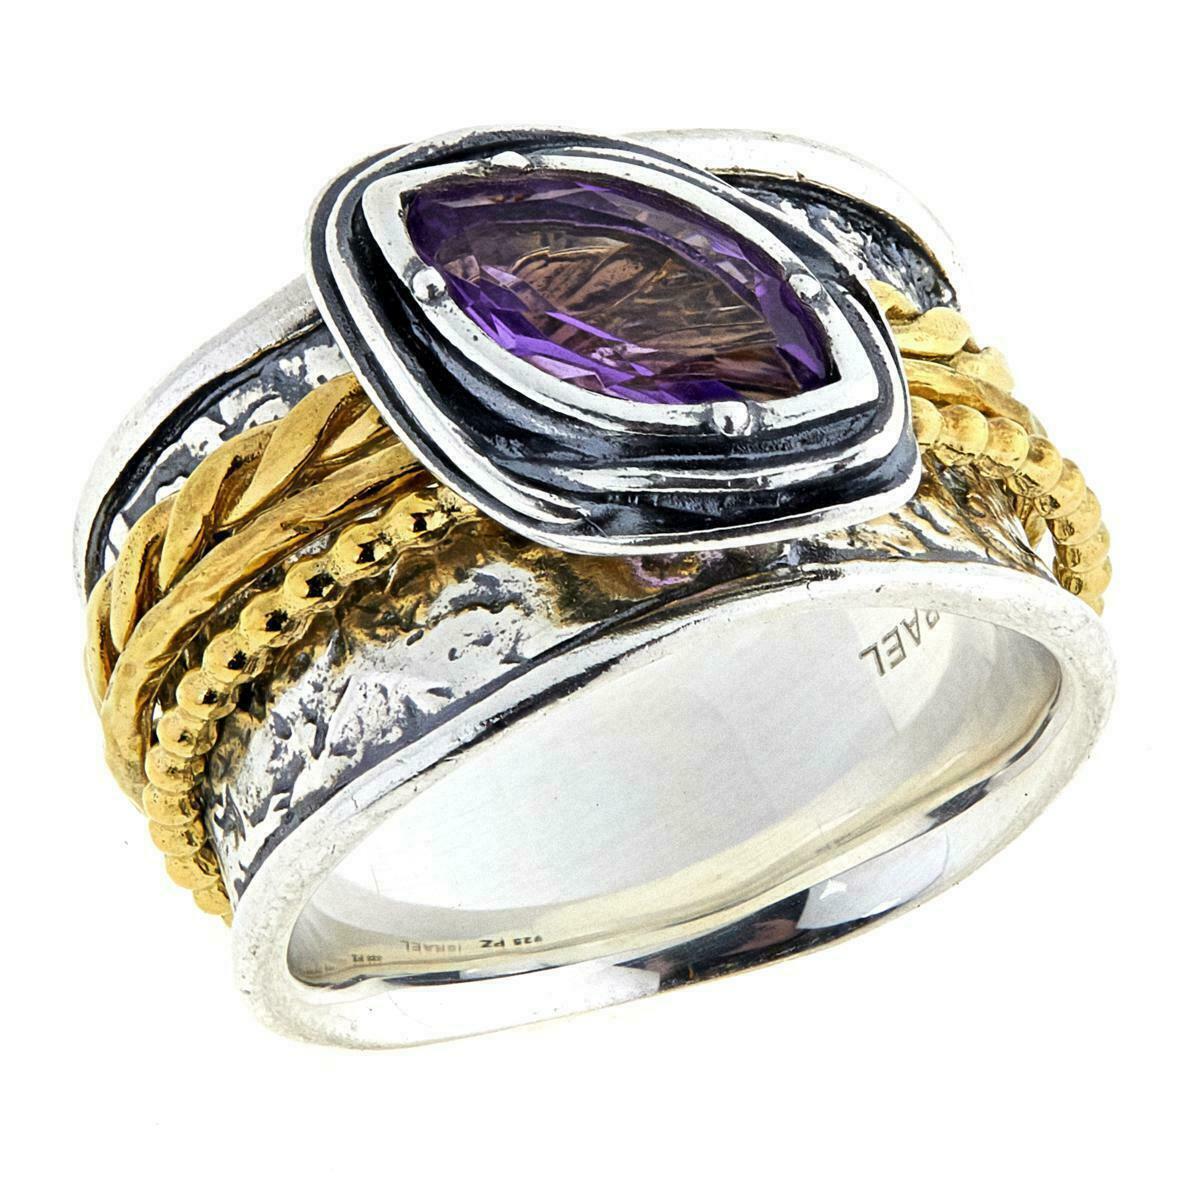 Lipaz 0.9Ct Amethyst 2-Tone Hammered Sterling Silver Spinner Ring Size 8 Hsn